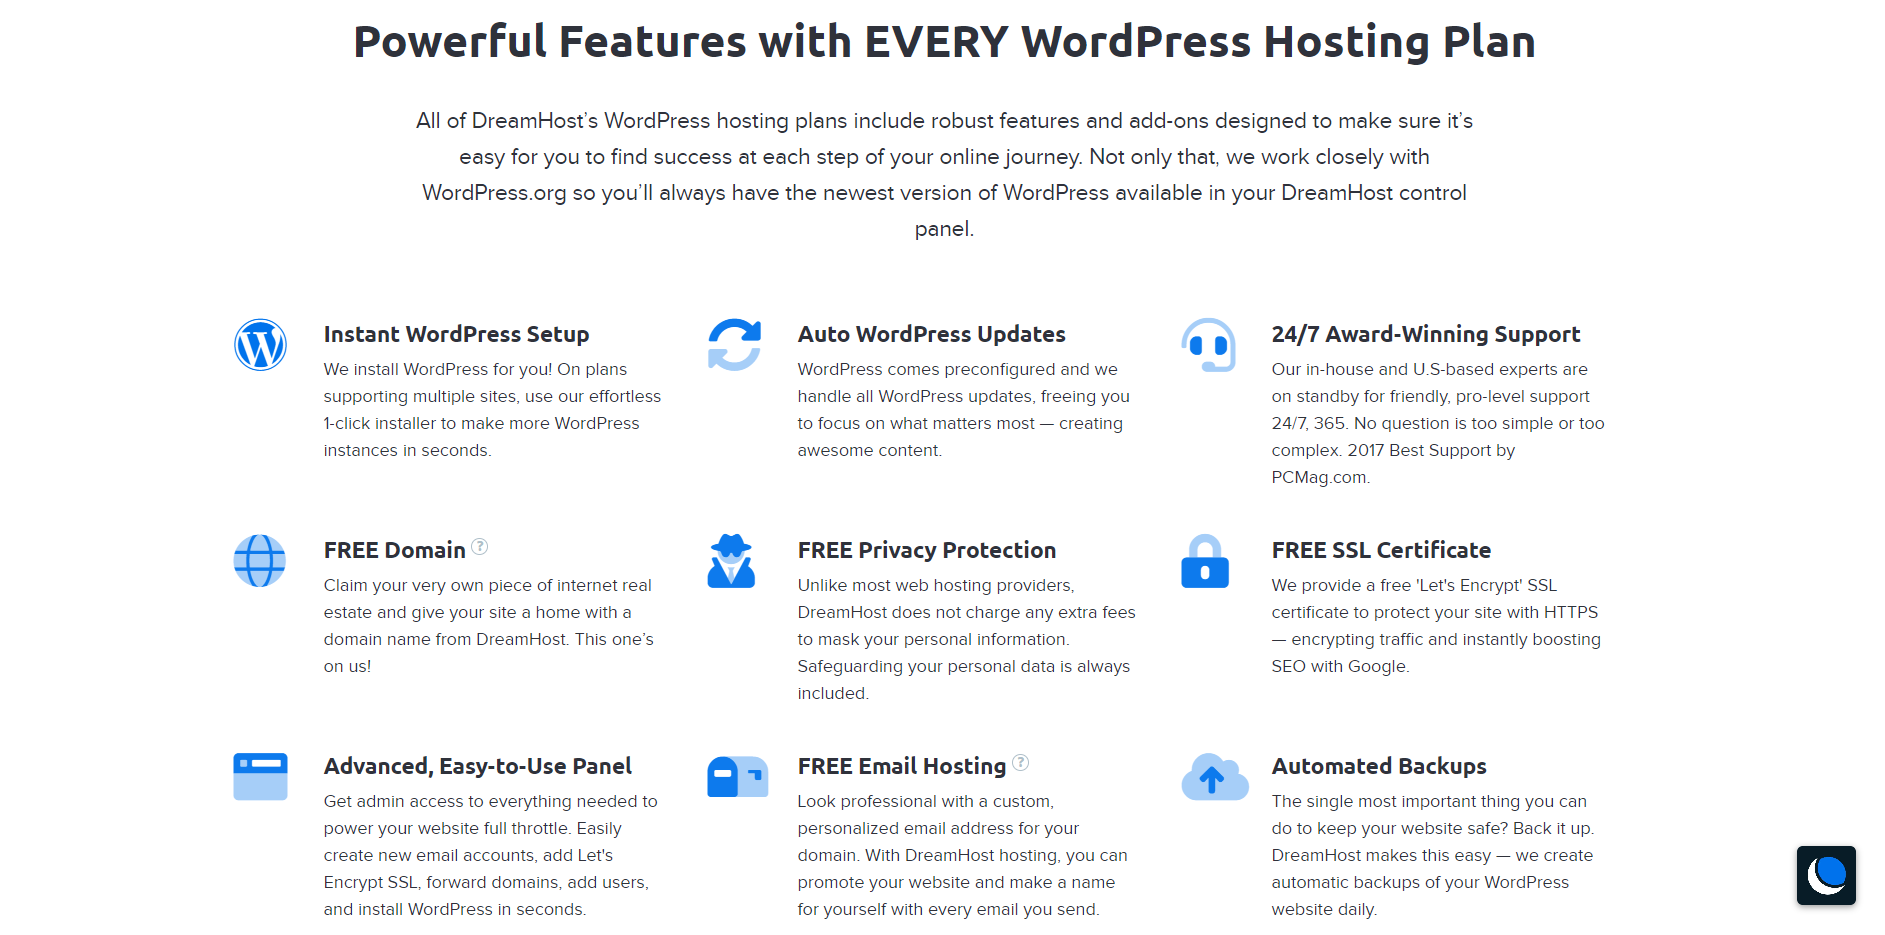 WordPress hosting features with DreamHost